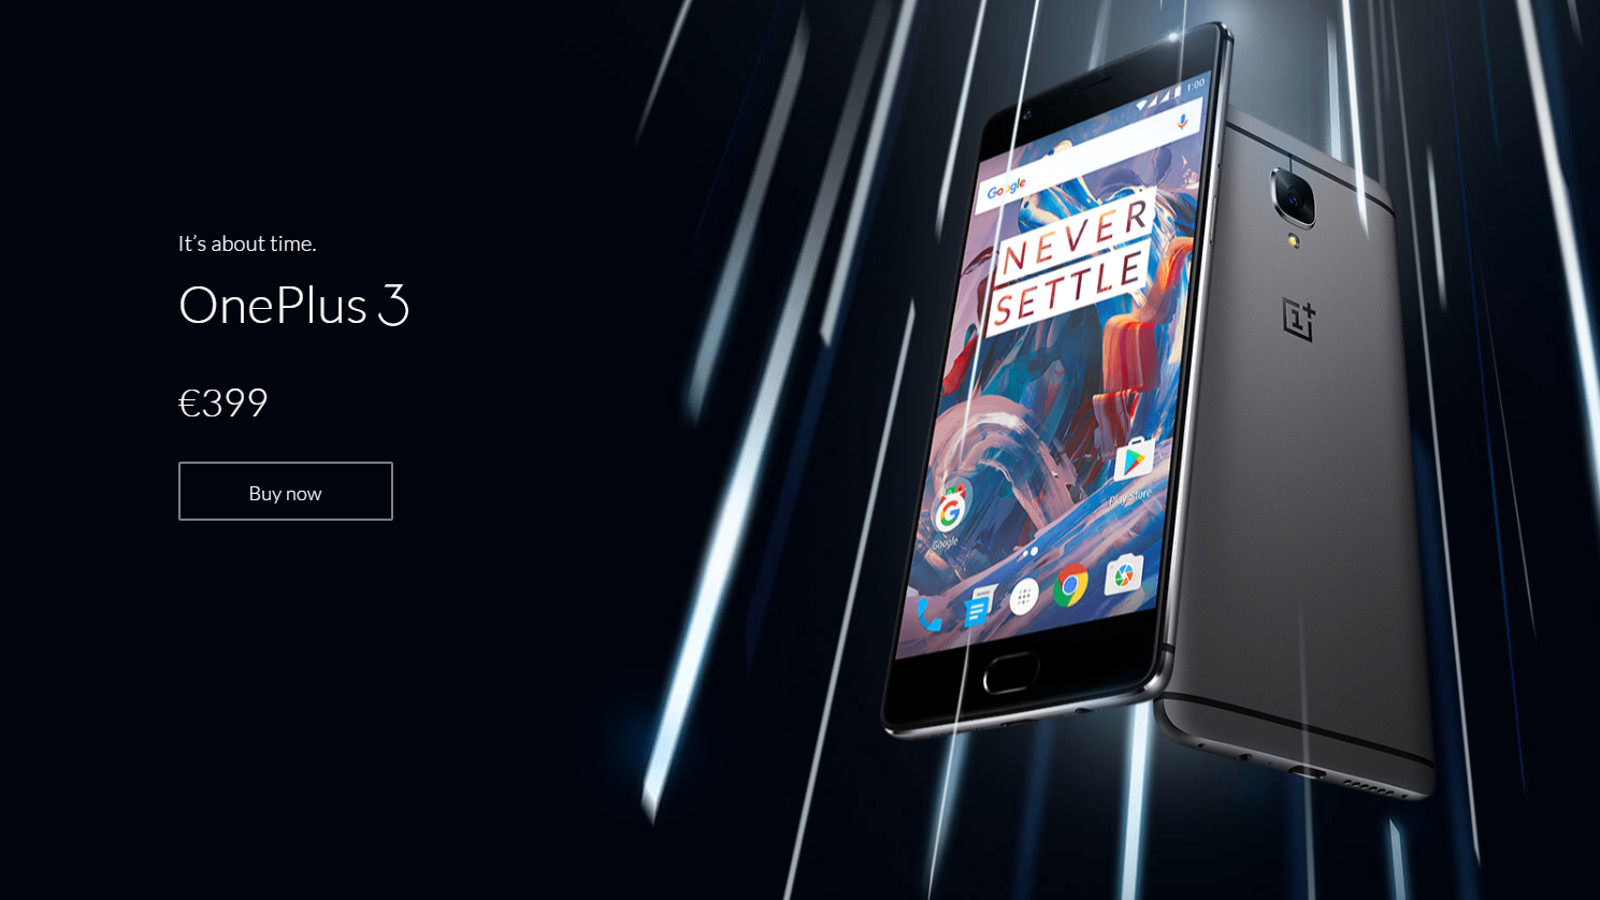 oneplus 3 featured